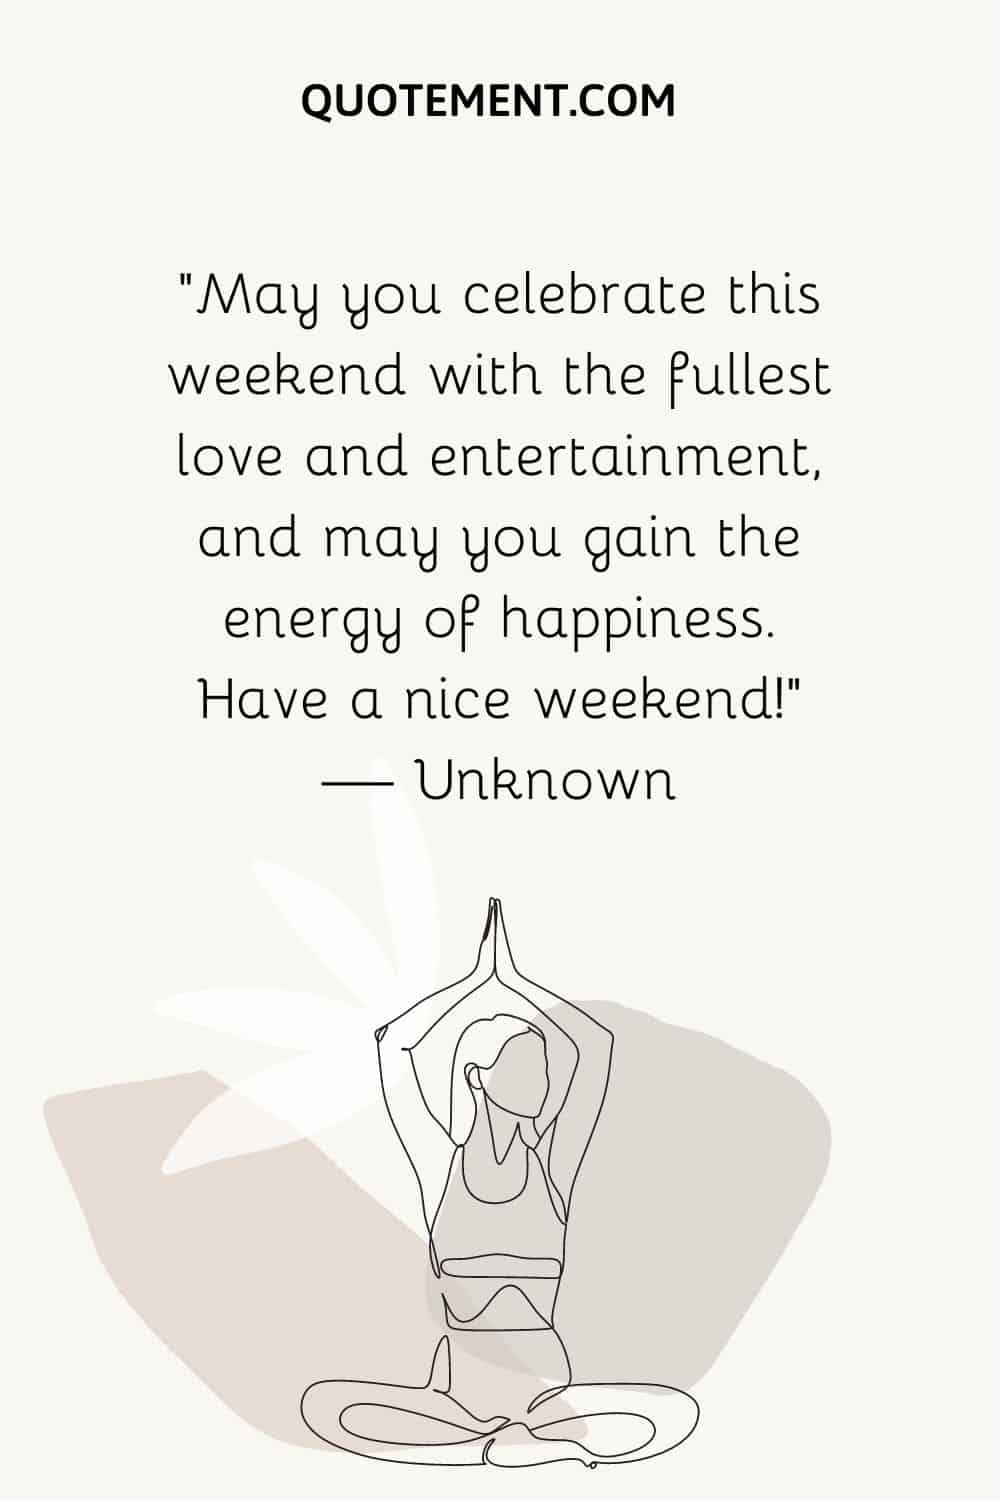 “May you celebrate this weekend with the fullest love and entertainment, and may you gain the energy of happiness. Have a nice weekend!” — Unknown